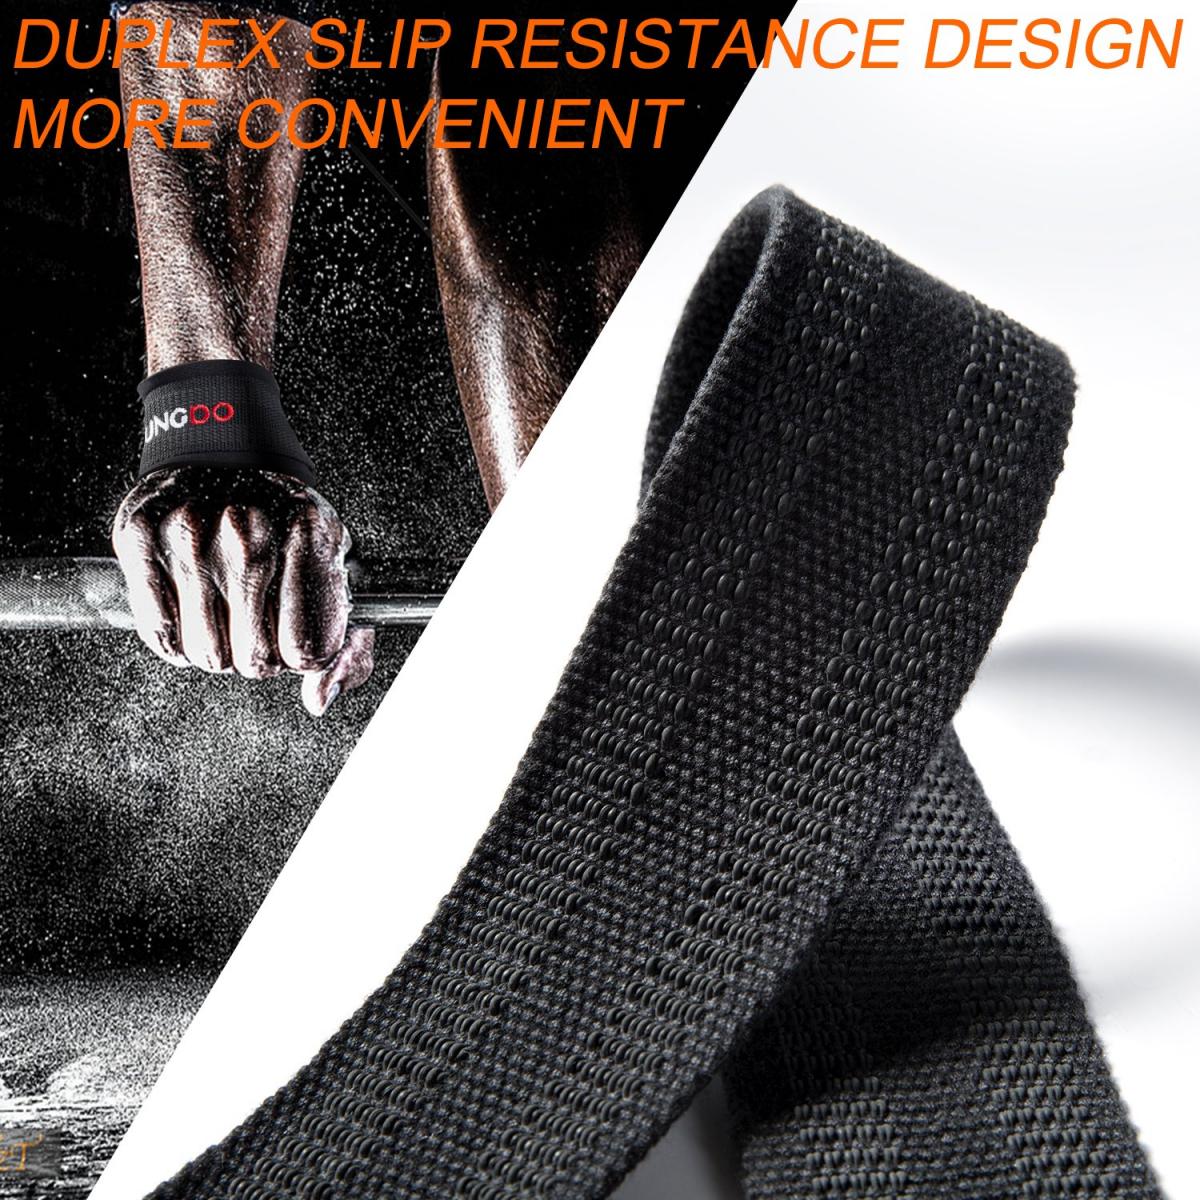 Lifting Straps, Wrist Straps Power Hand Bar Straps Gym Neoprene Padded  Anti-Slip to Strengthen Grip for Weightlifting